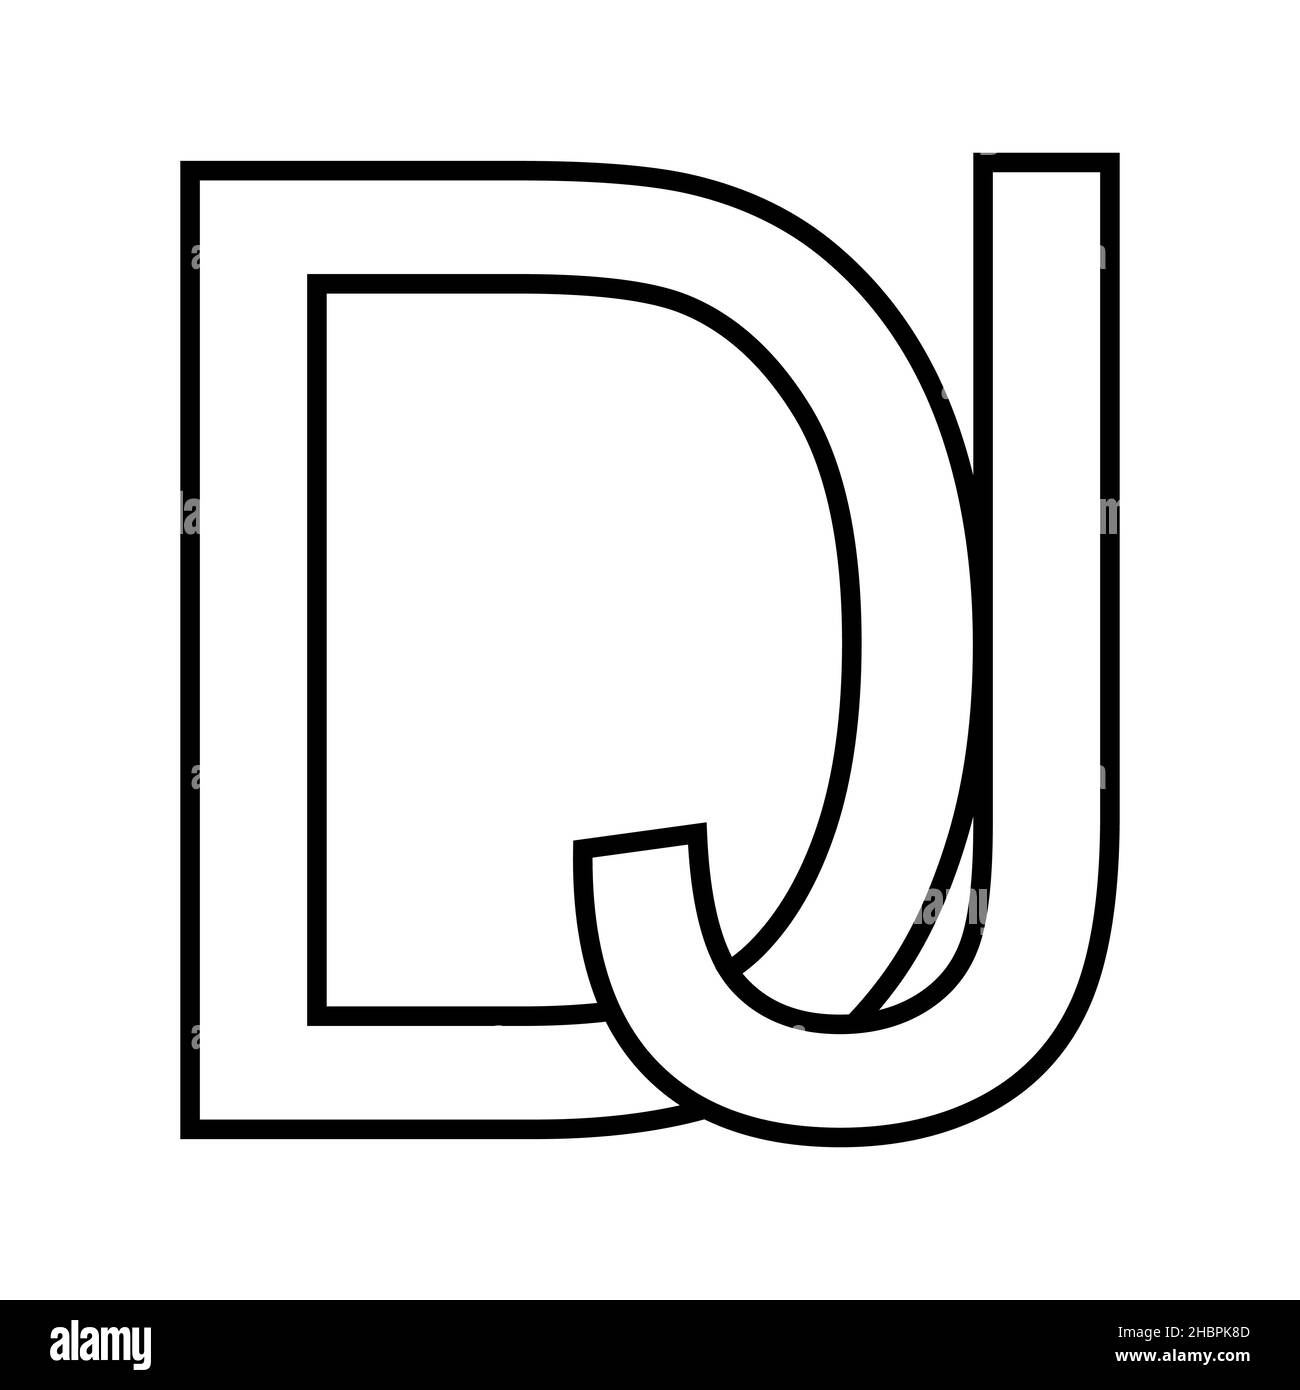 Logo sign dj jd icon, sign interlaced letters d j Stock Vector